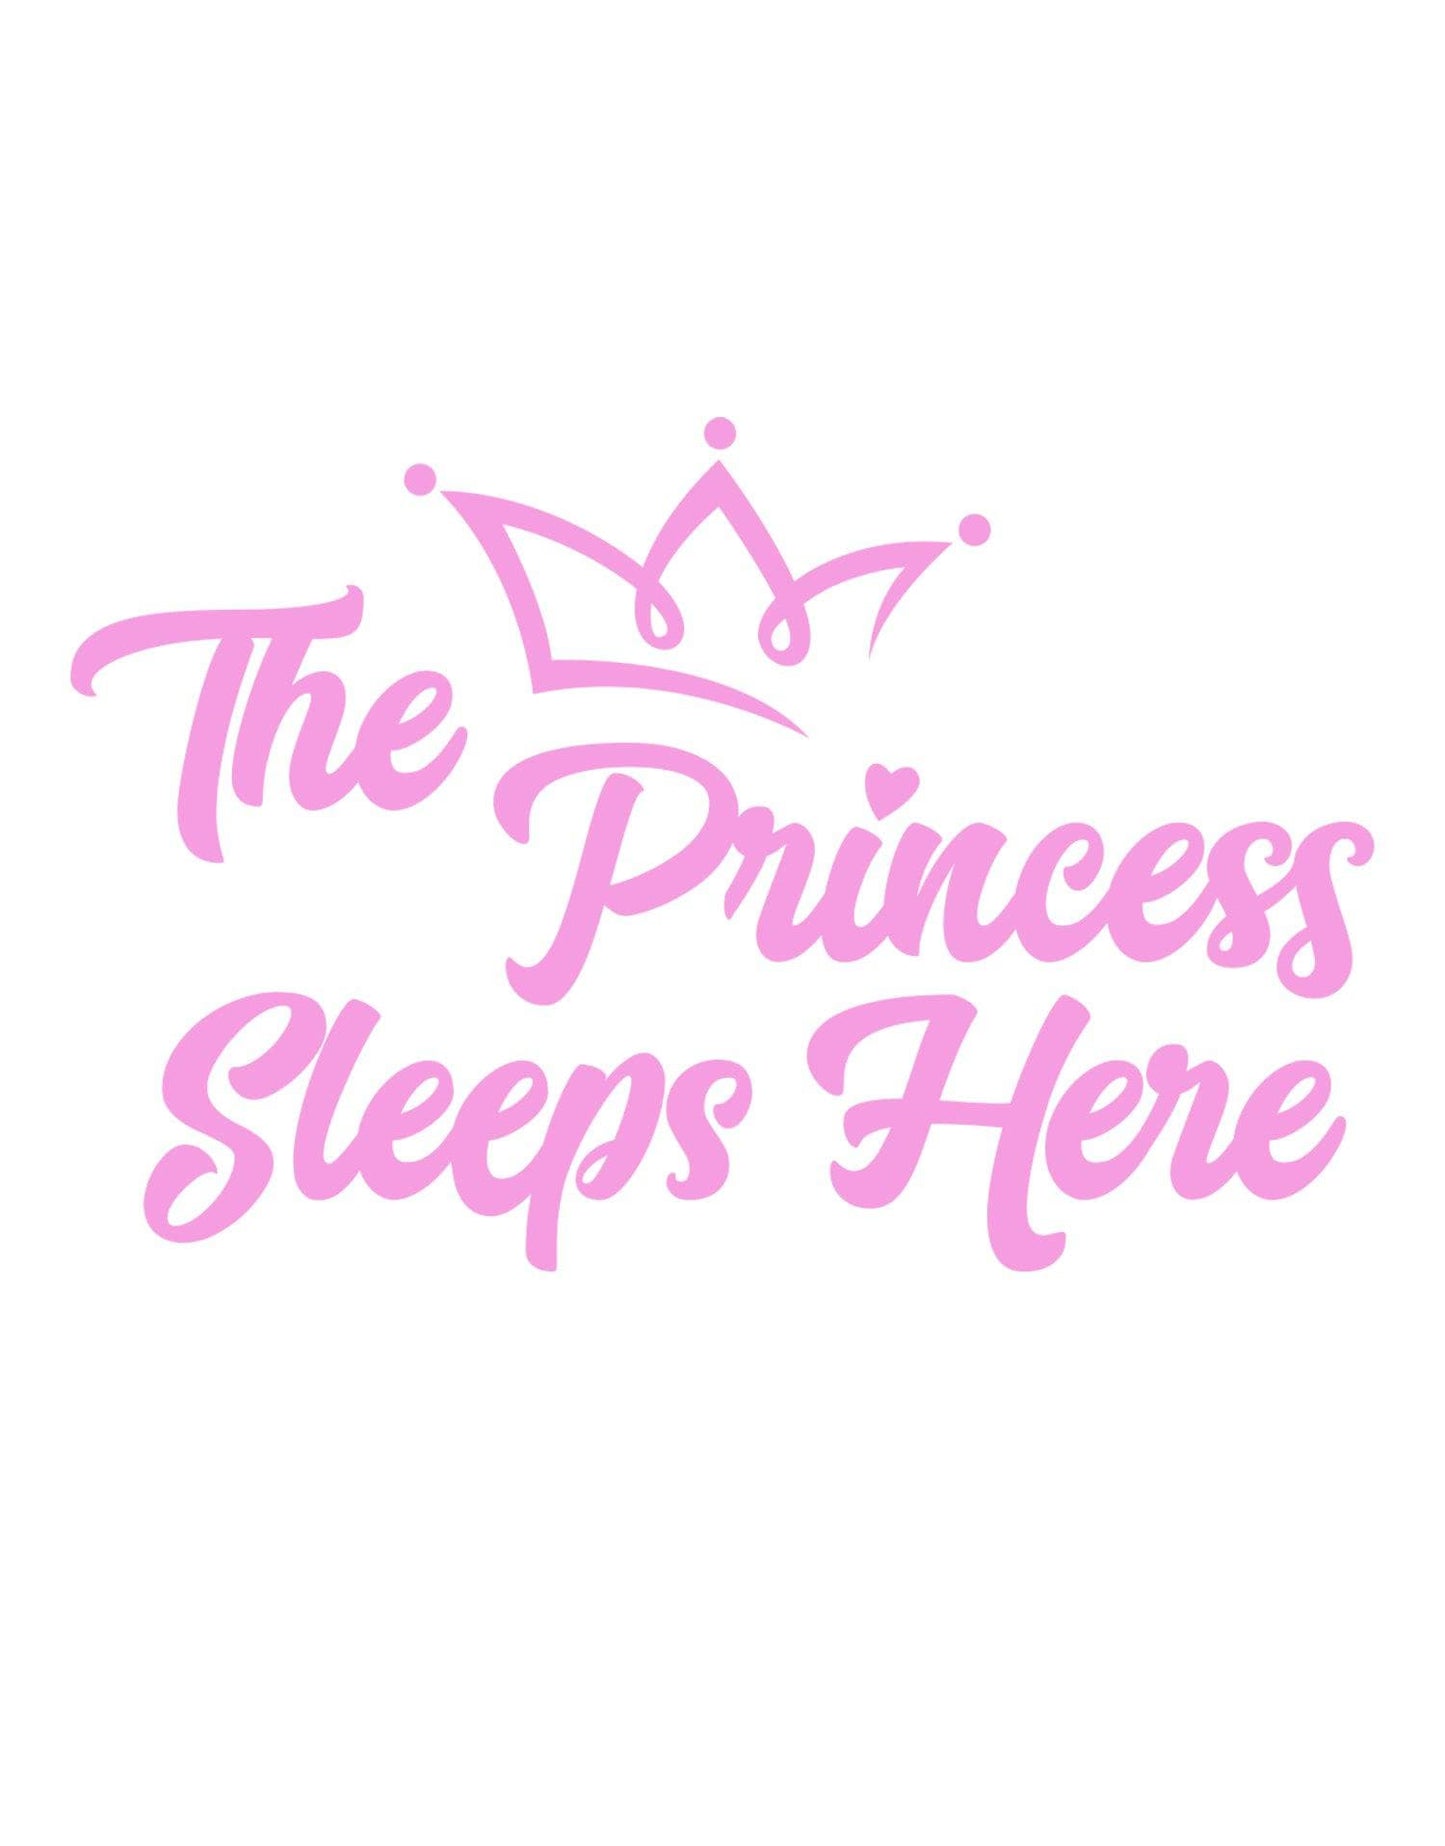 The Princess Sleeps Here Quote Wall Decal. #6254